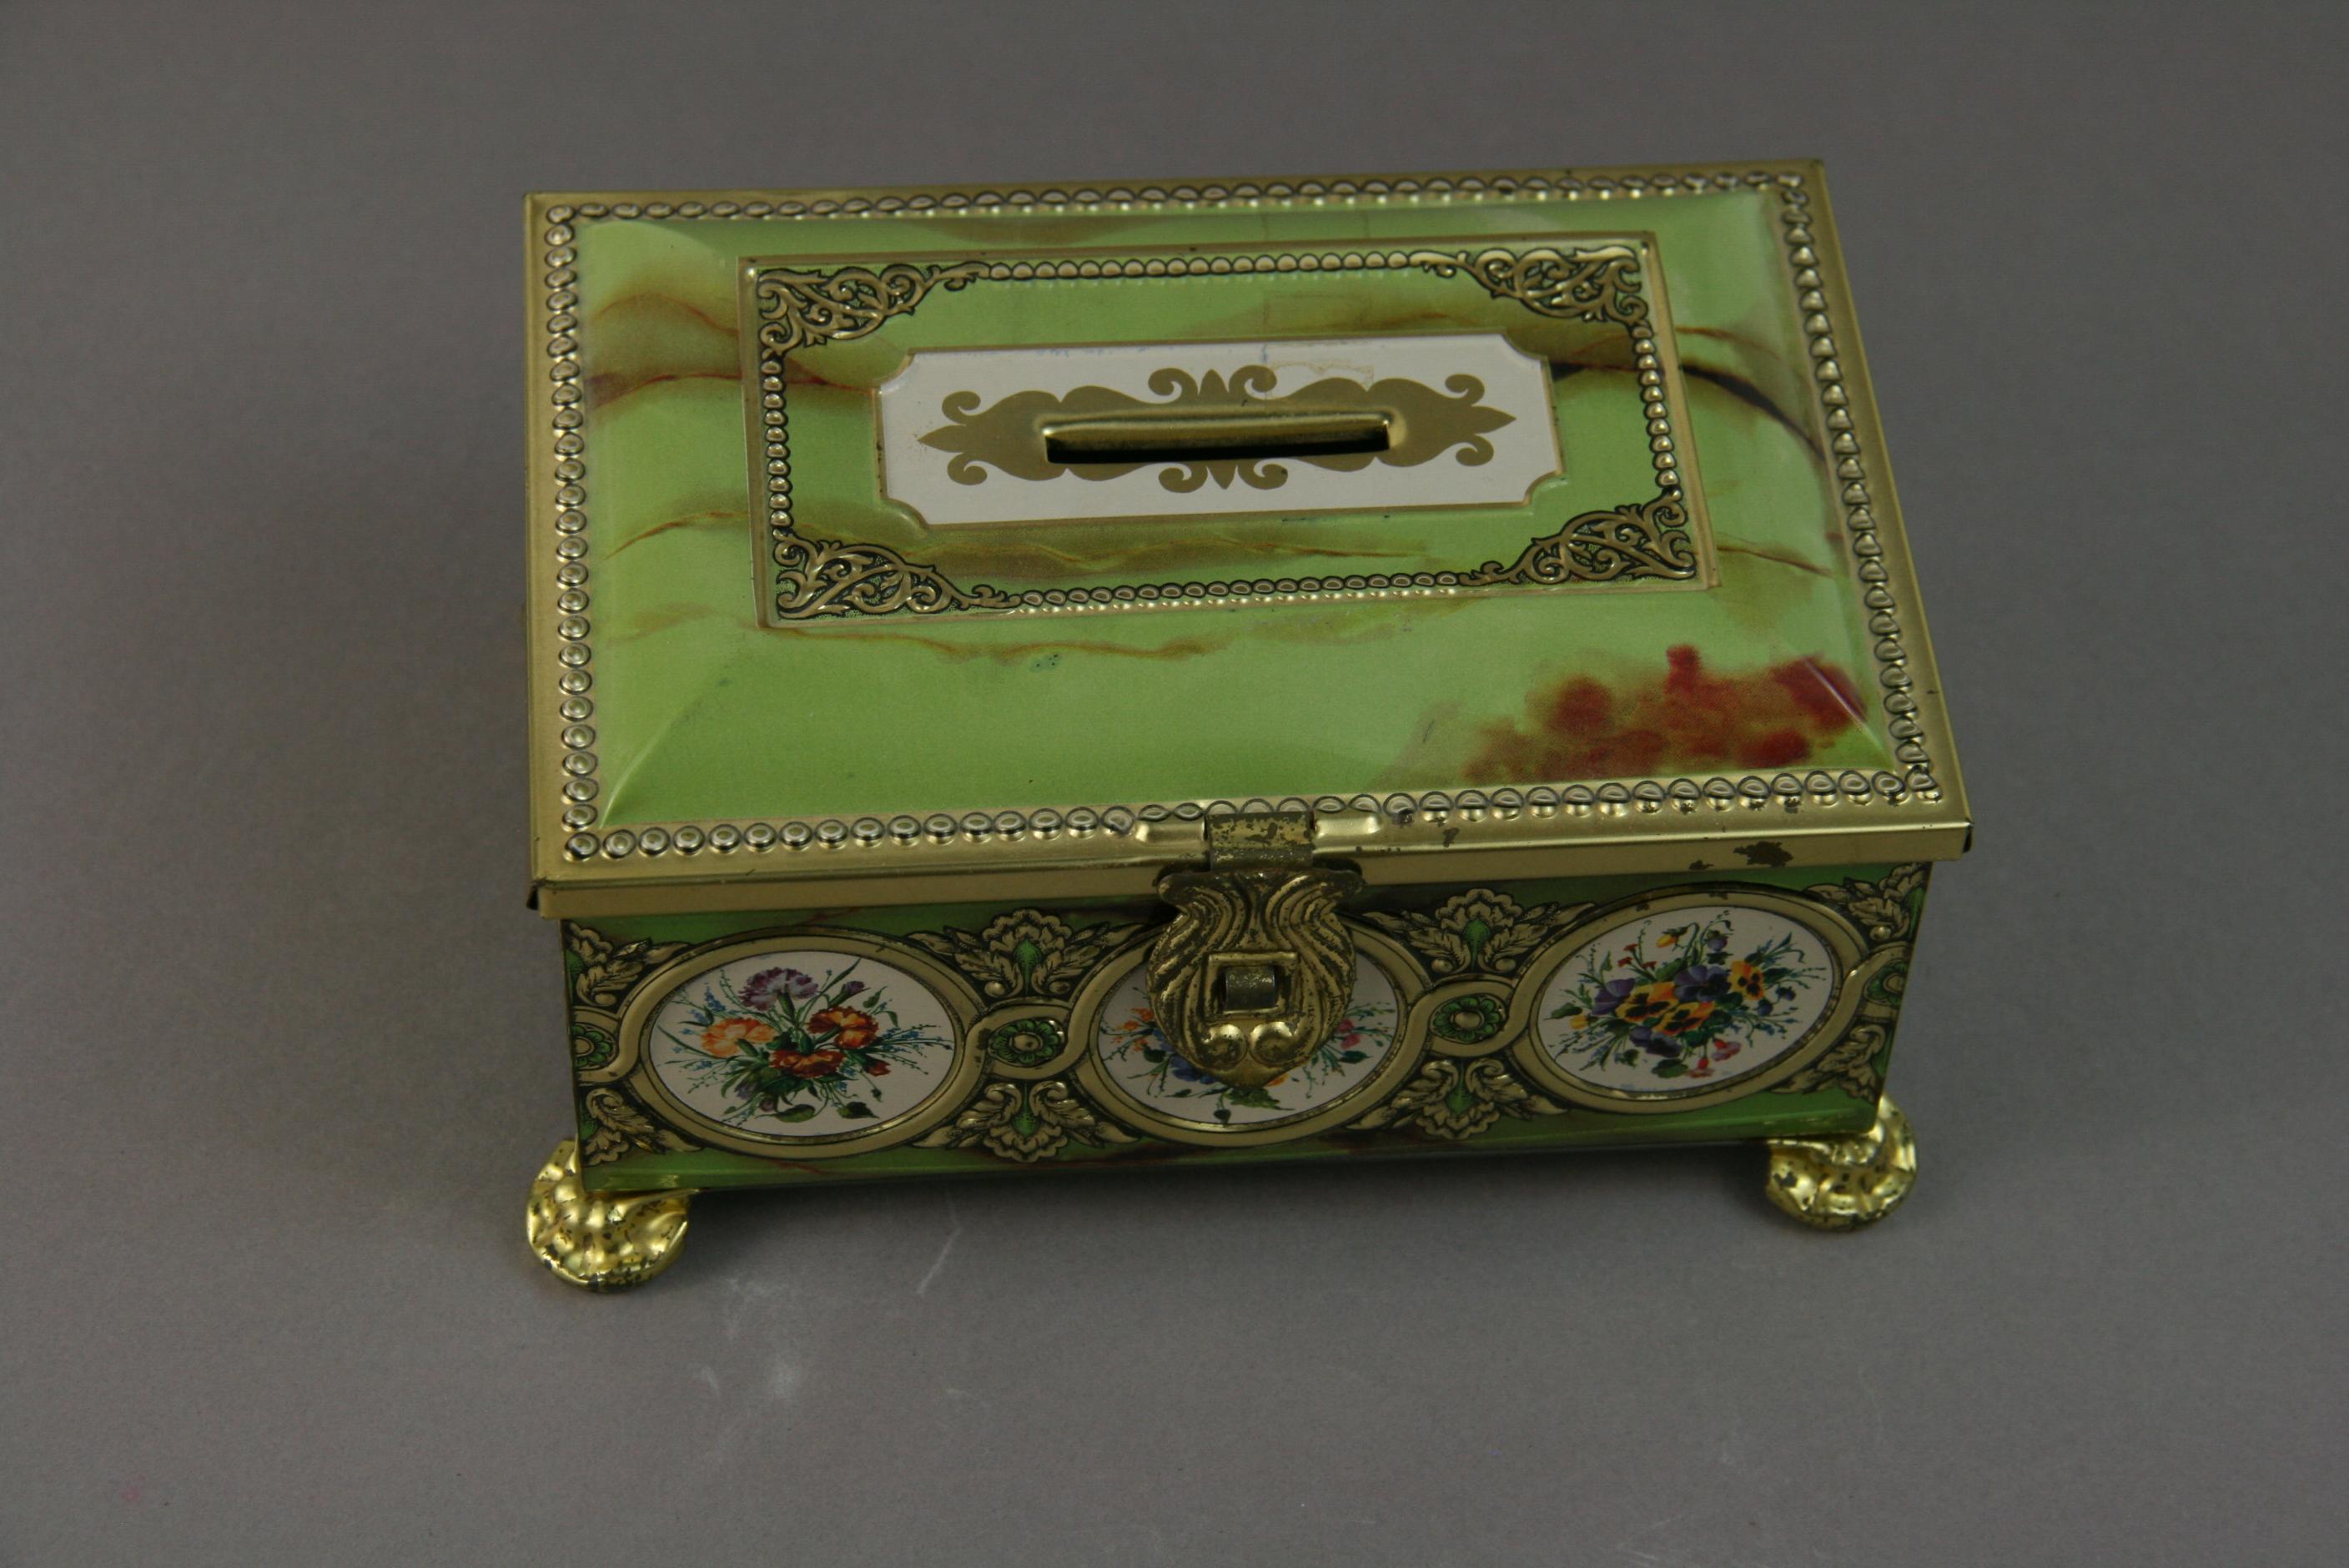 3-375 tin container /bank green gold floral detailing with gilt feet
Made by Klann in Western Germany.
Other similar boxes available different colors